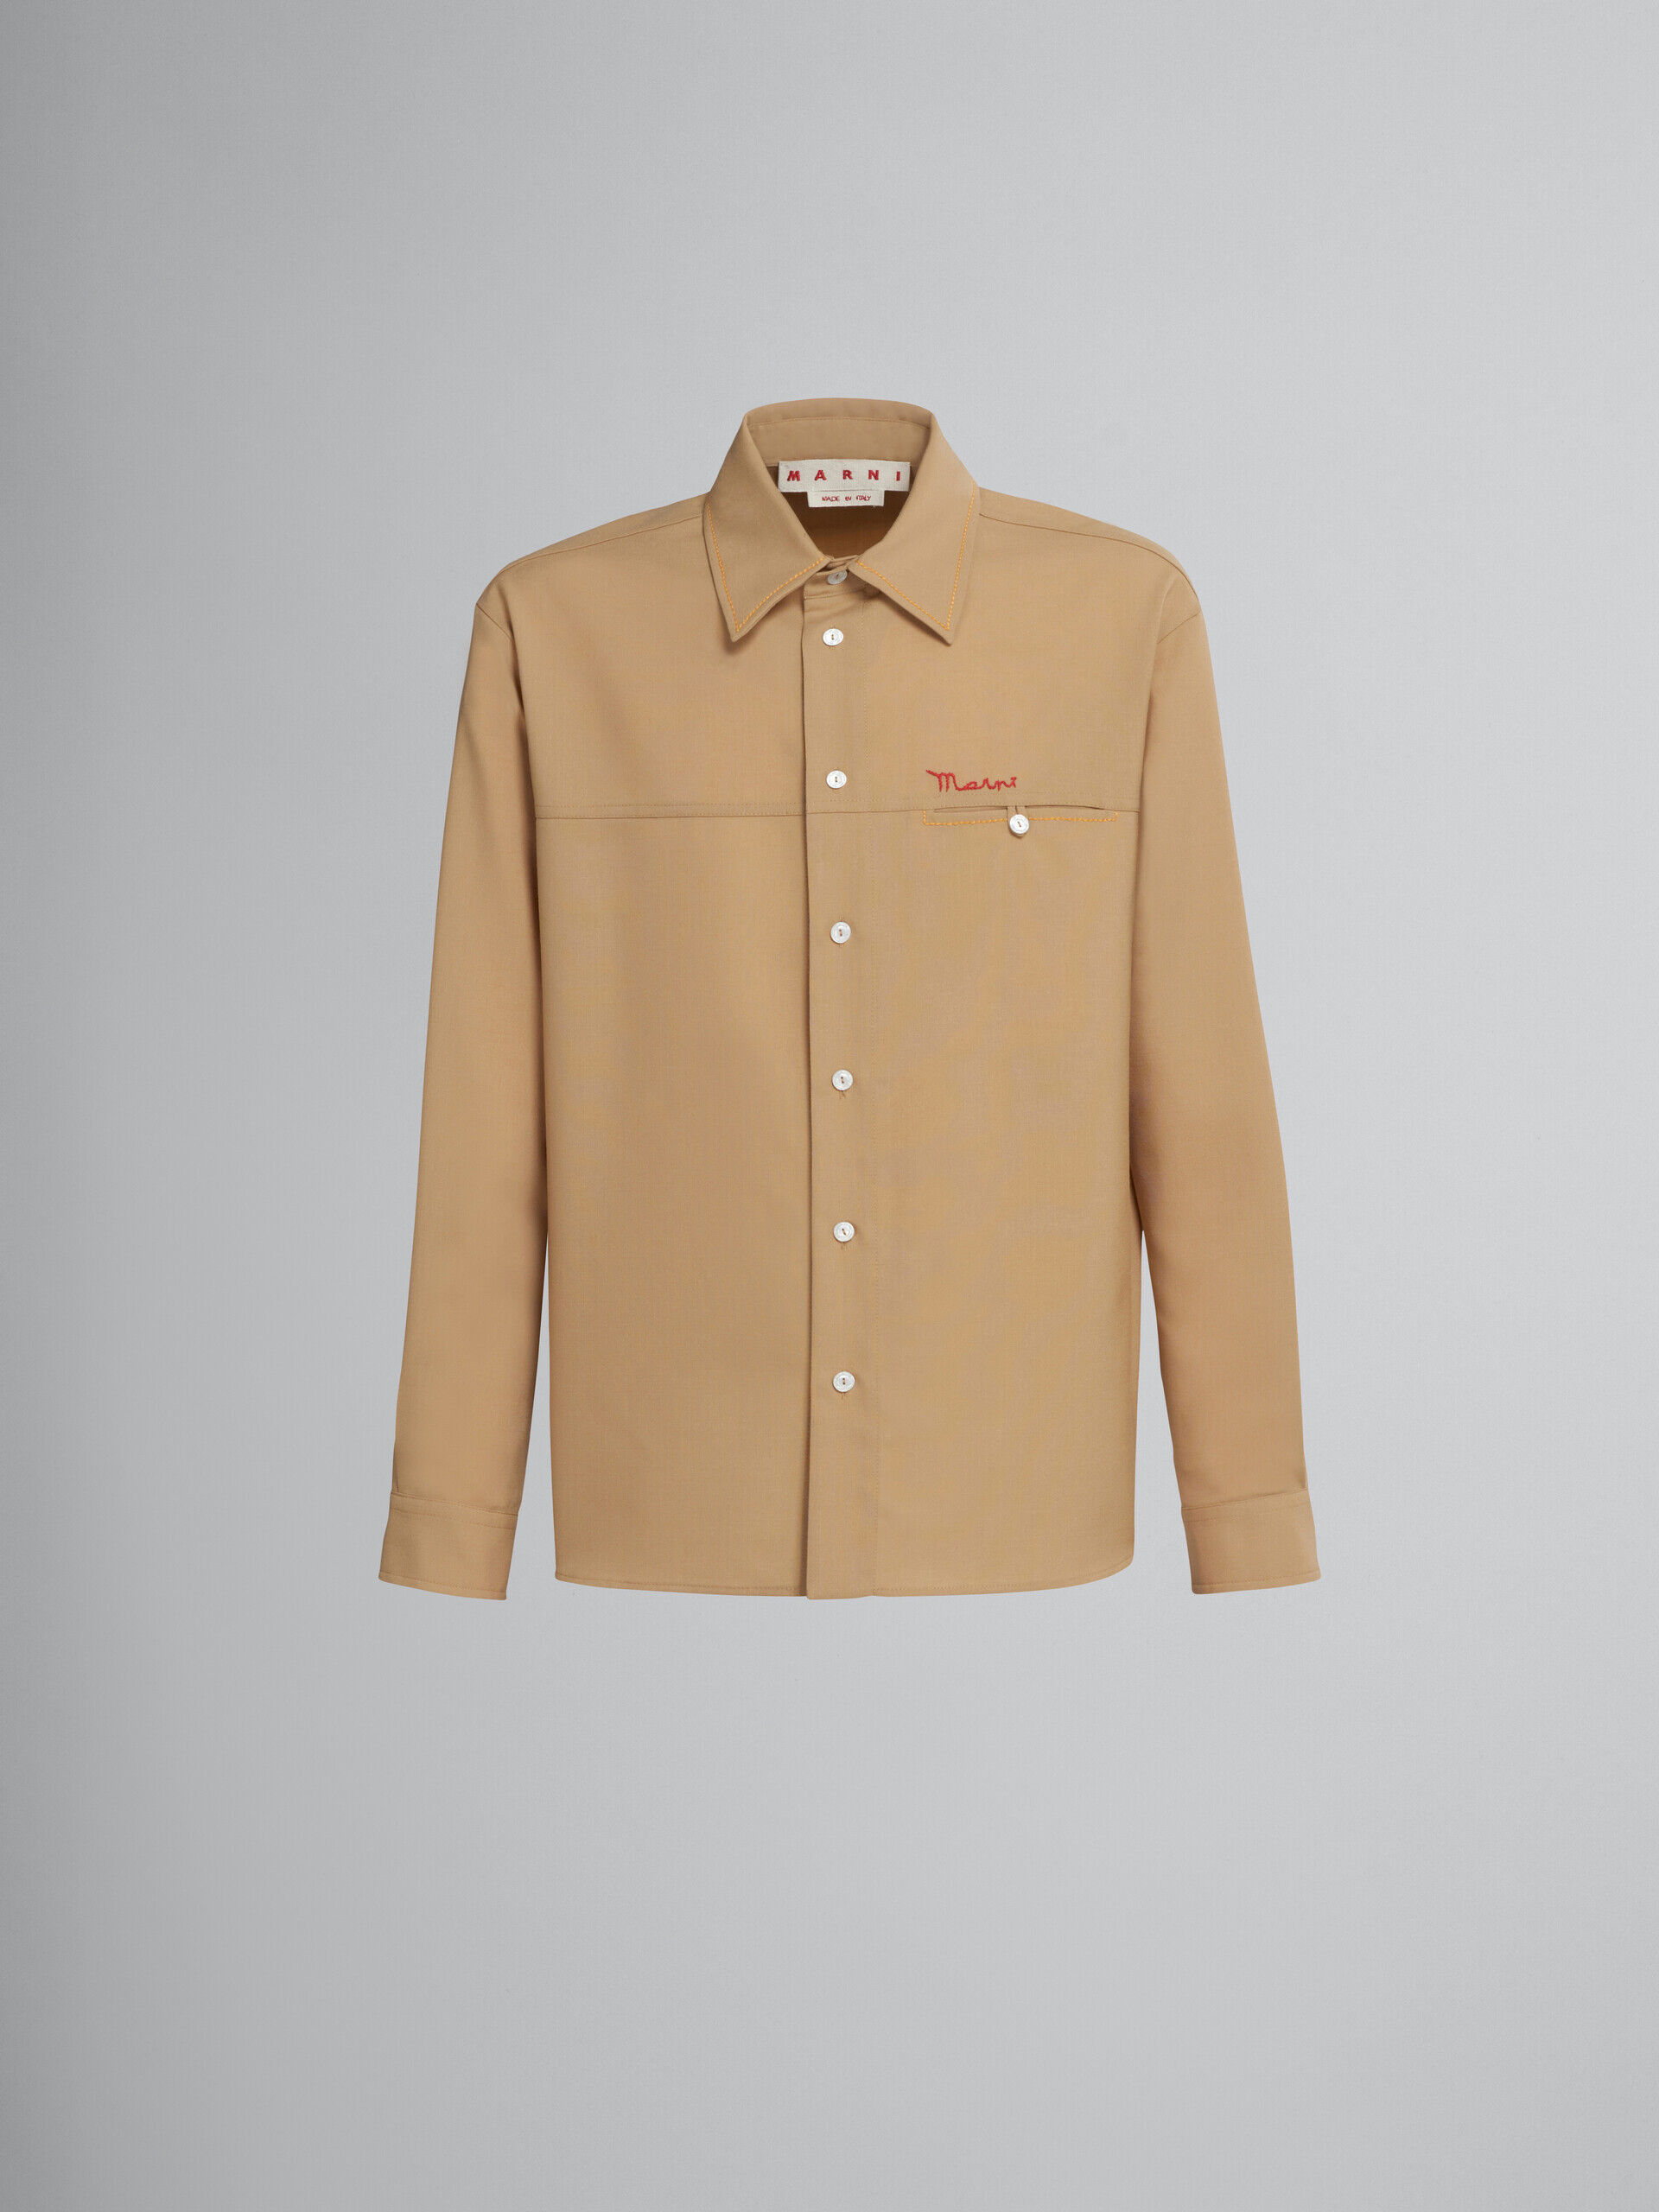 Beige tropical wool shirt with embroidered logo | Marni